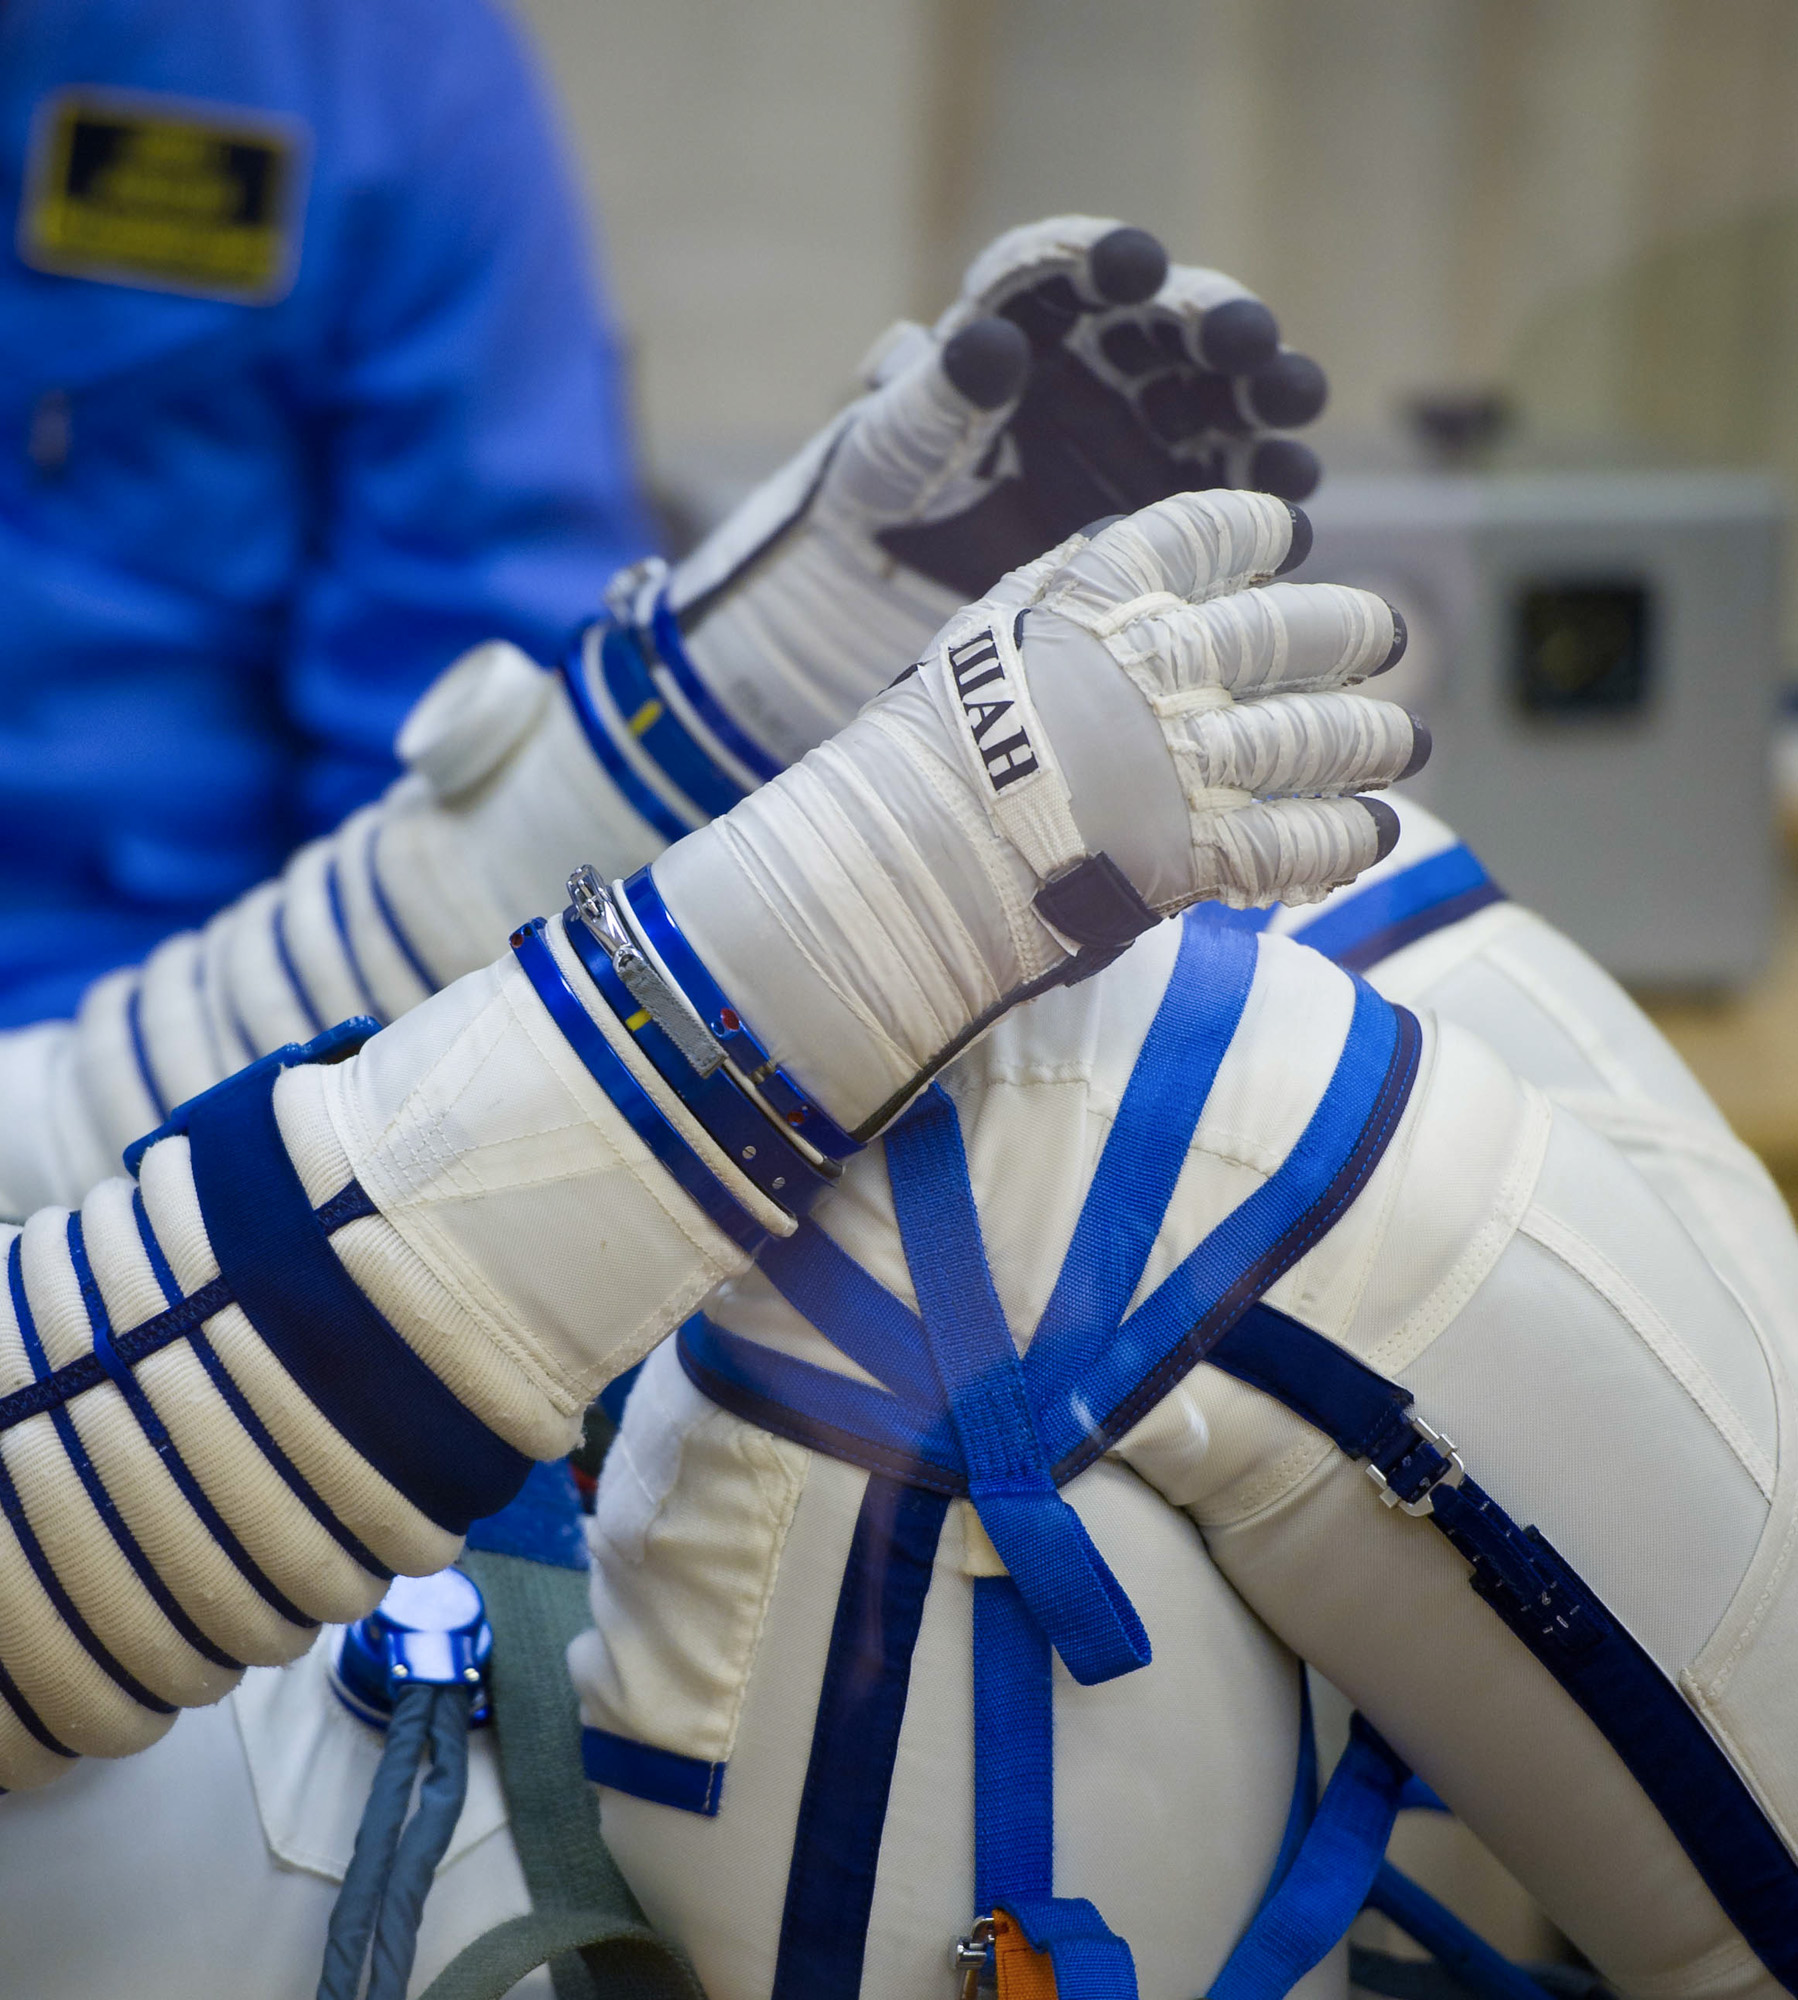  Expedition 29 Soyuz Commander Anton Shkaplerov has his Russian Sokol suit pressure checked in preparation for his launch to the International Space Station, Monday, Nov. 14, 2011 at the Baikonur Cosmodrome in Kazakhstan. The Soyuz TMA-22 spacecraft 